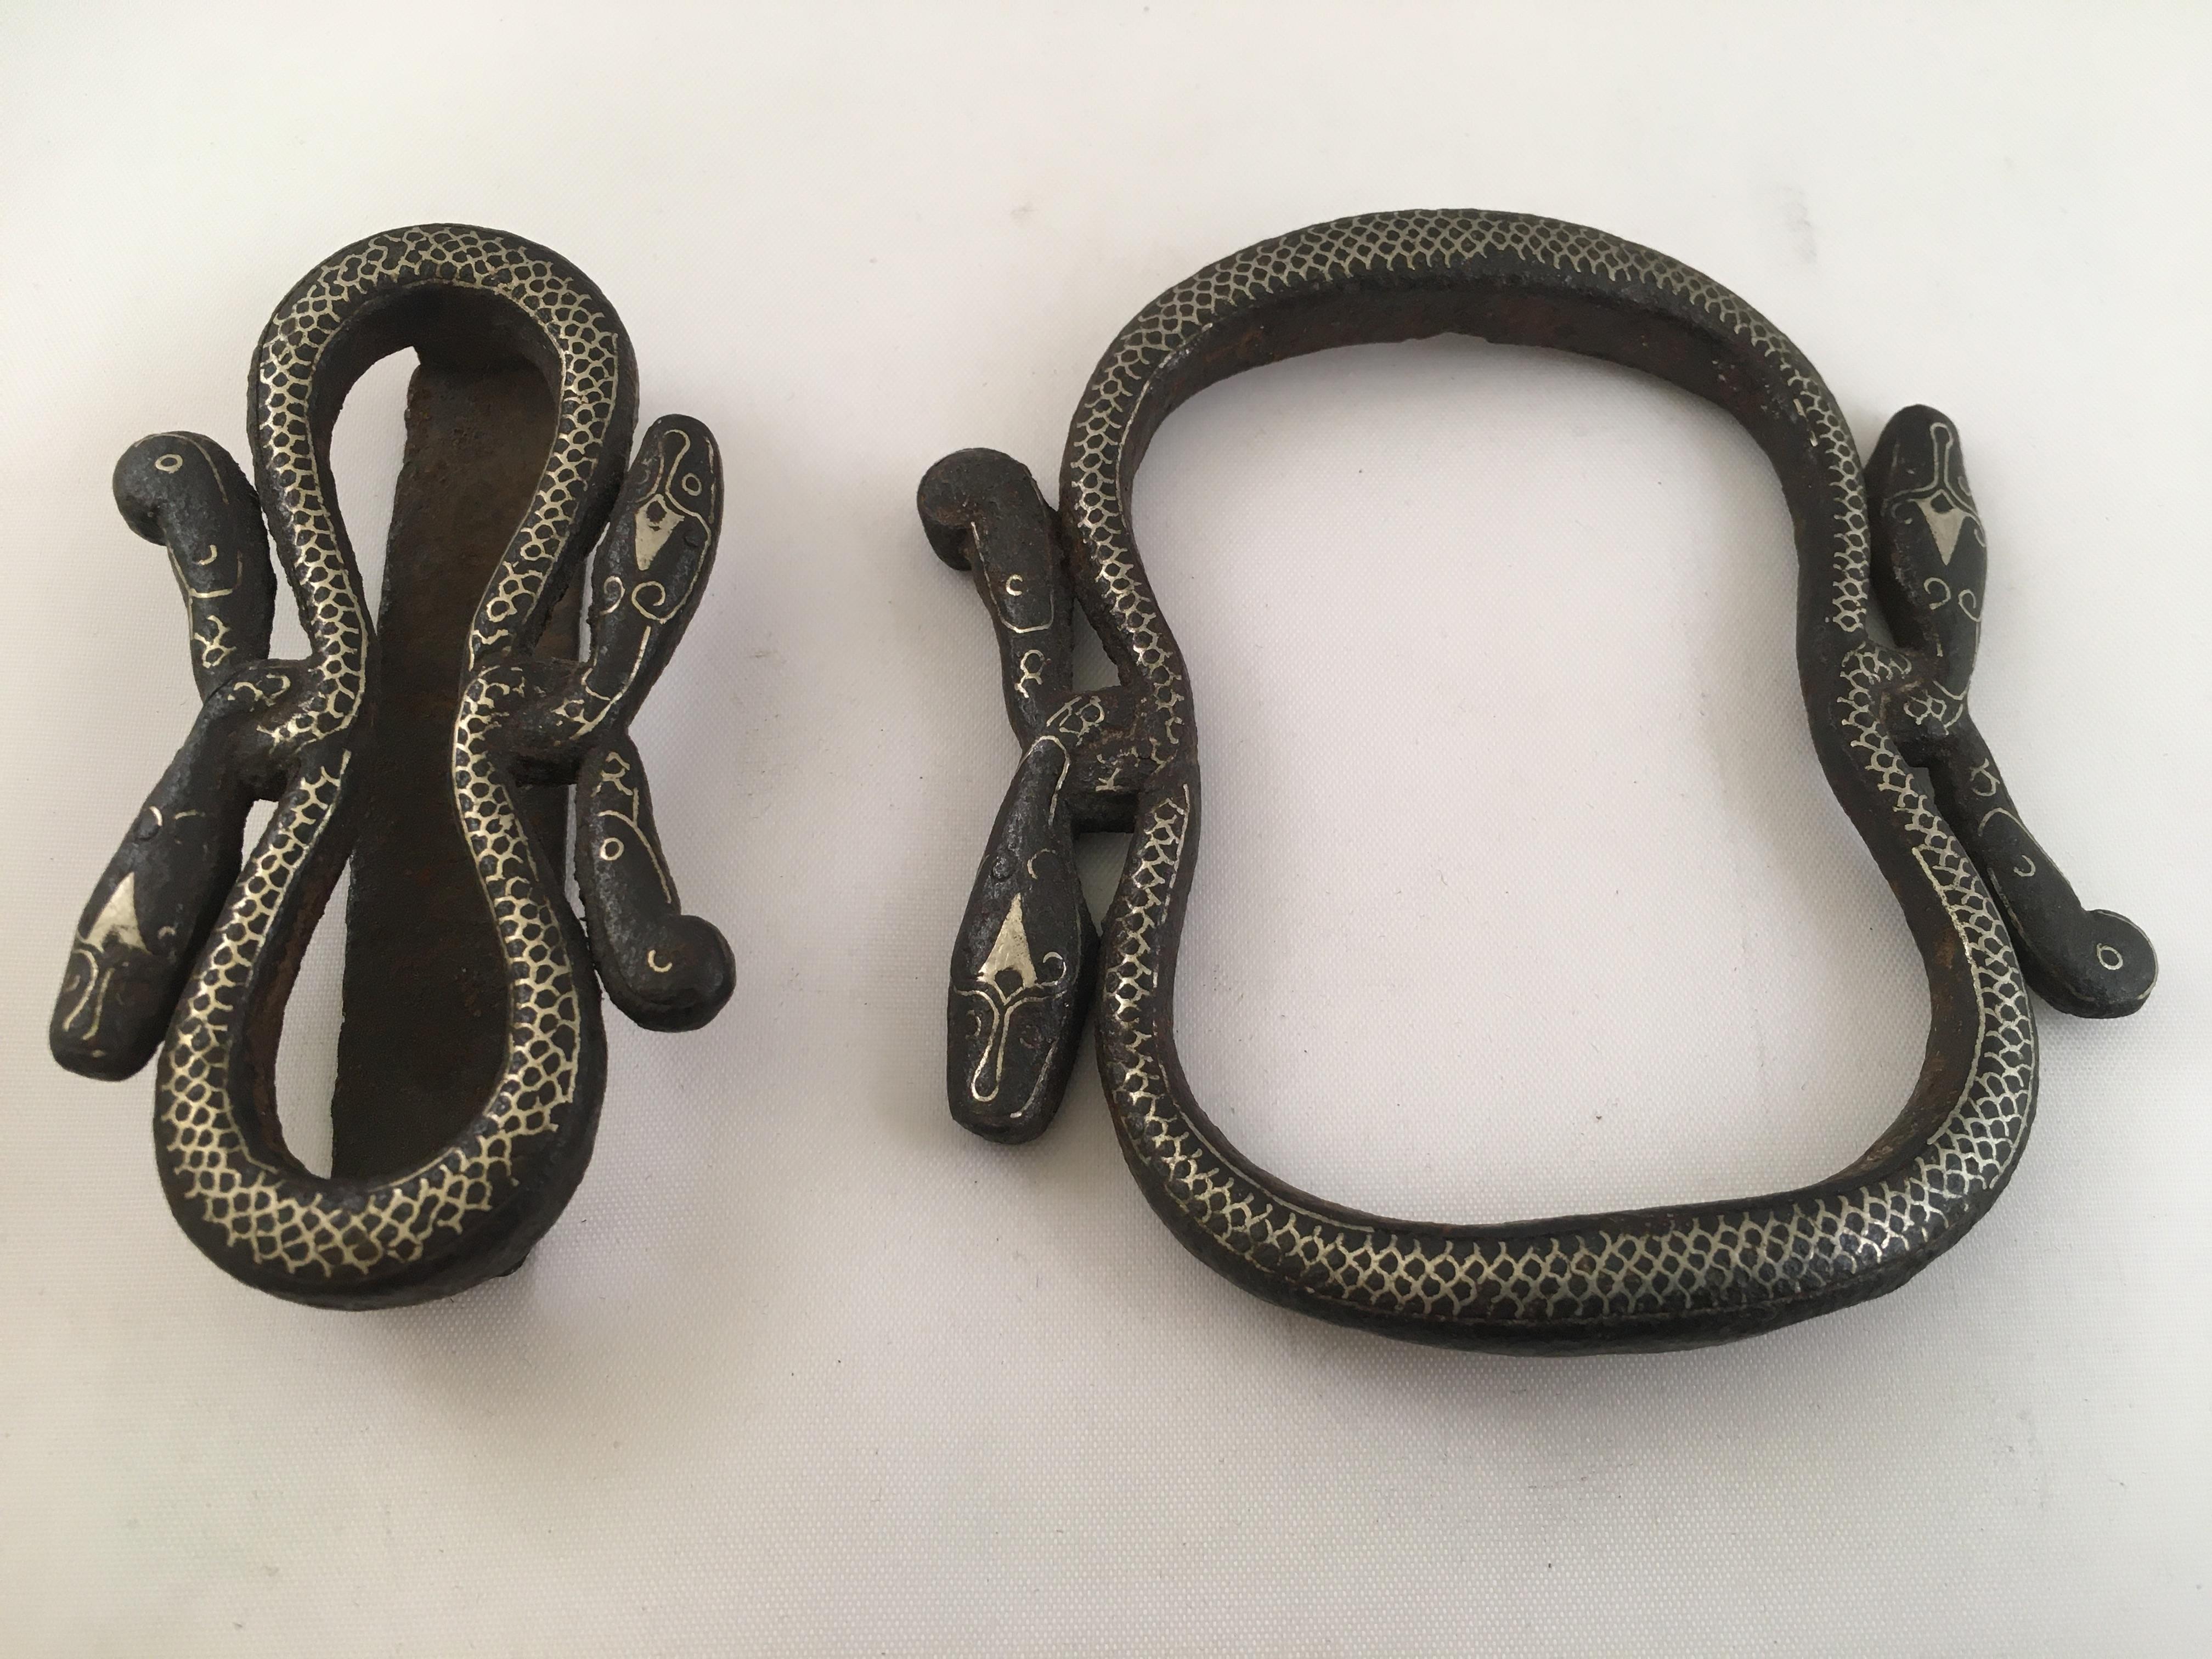 19th Century Java Surakarta Court Iron/Silver Inlay Snake Belt, Buckle and Slid For Sale 2